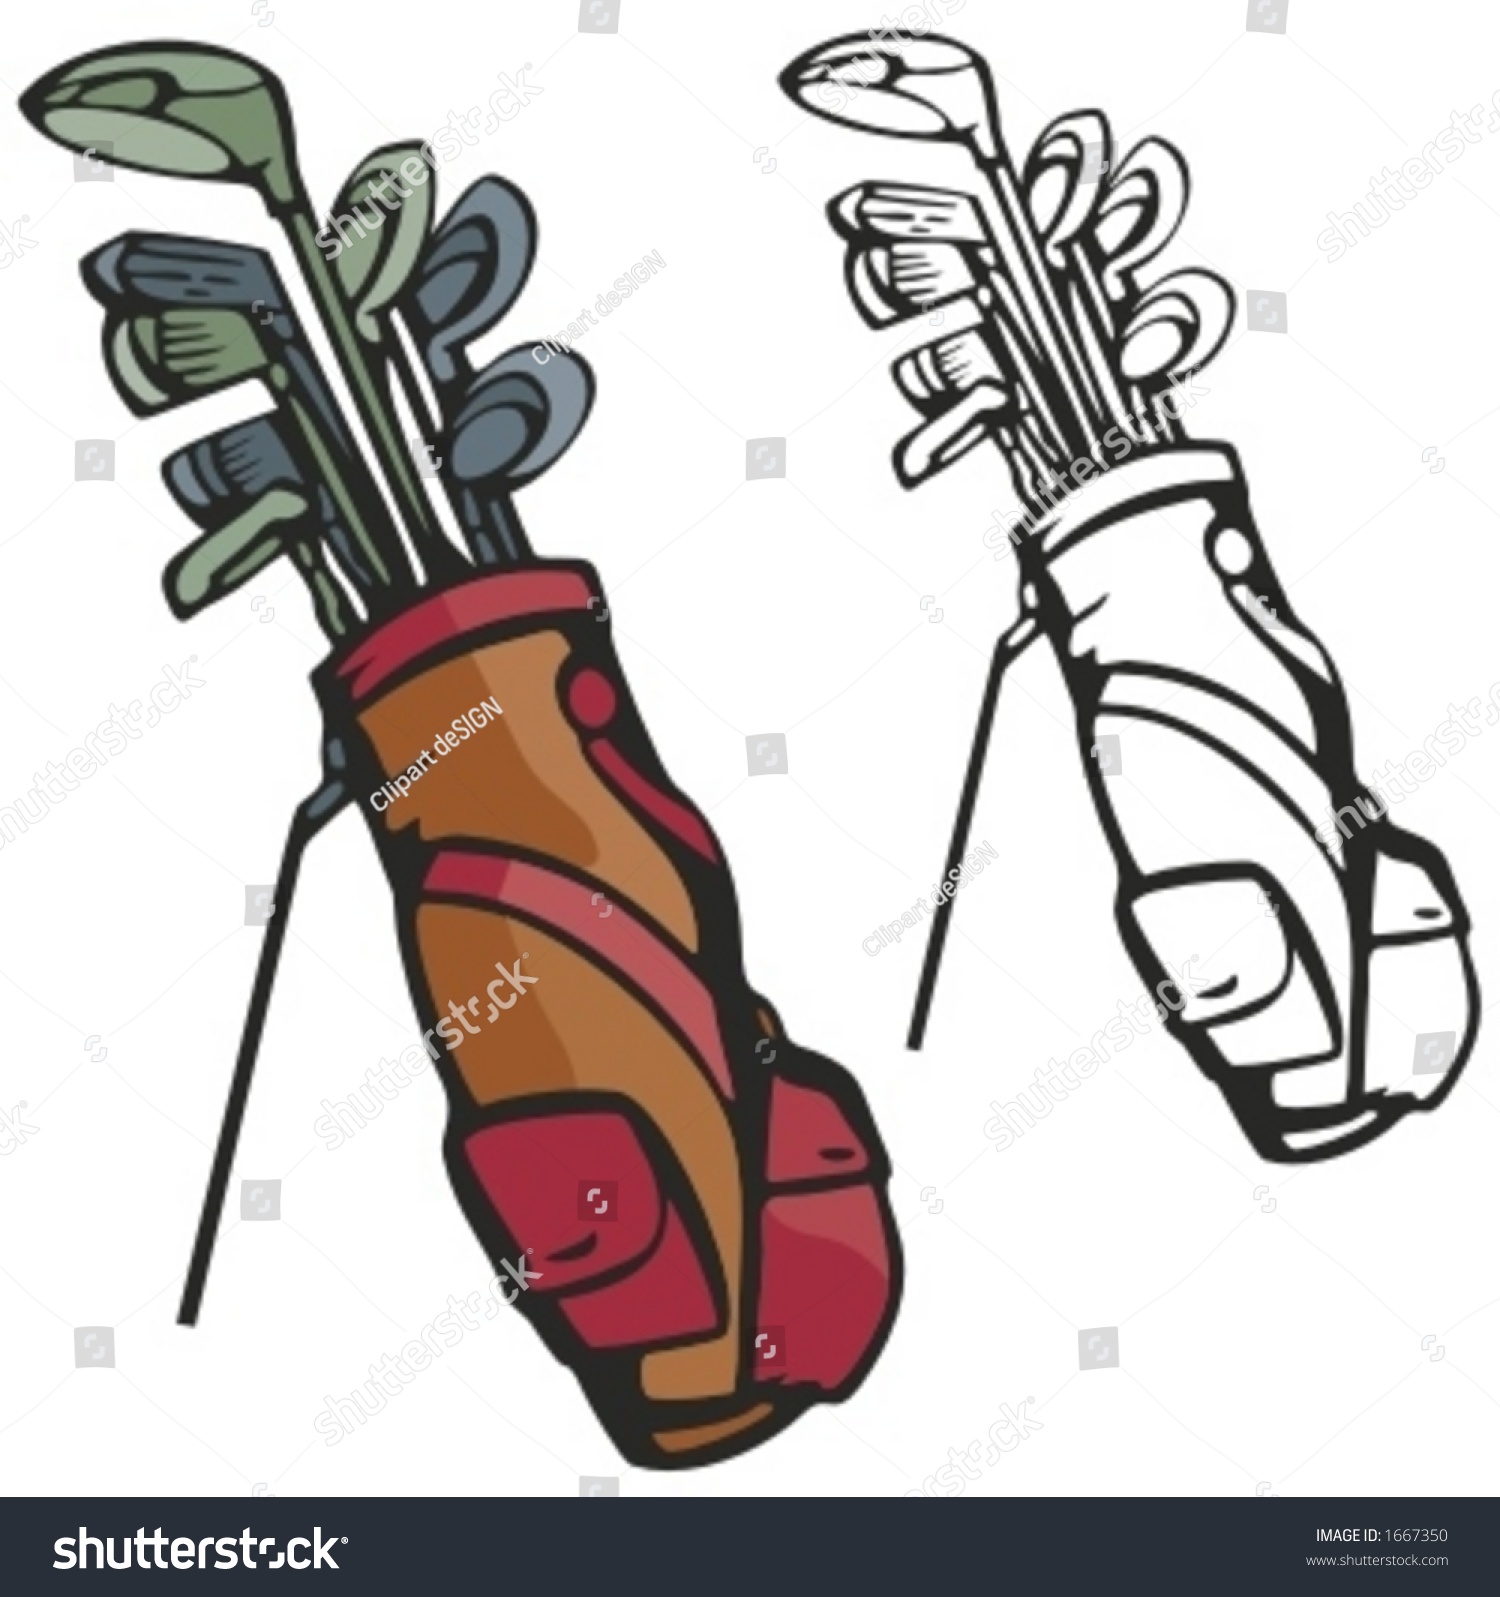 clipart golf clubs and bag - photo #20